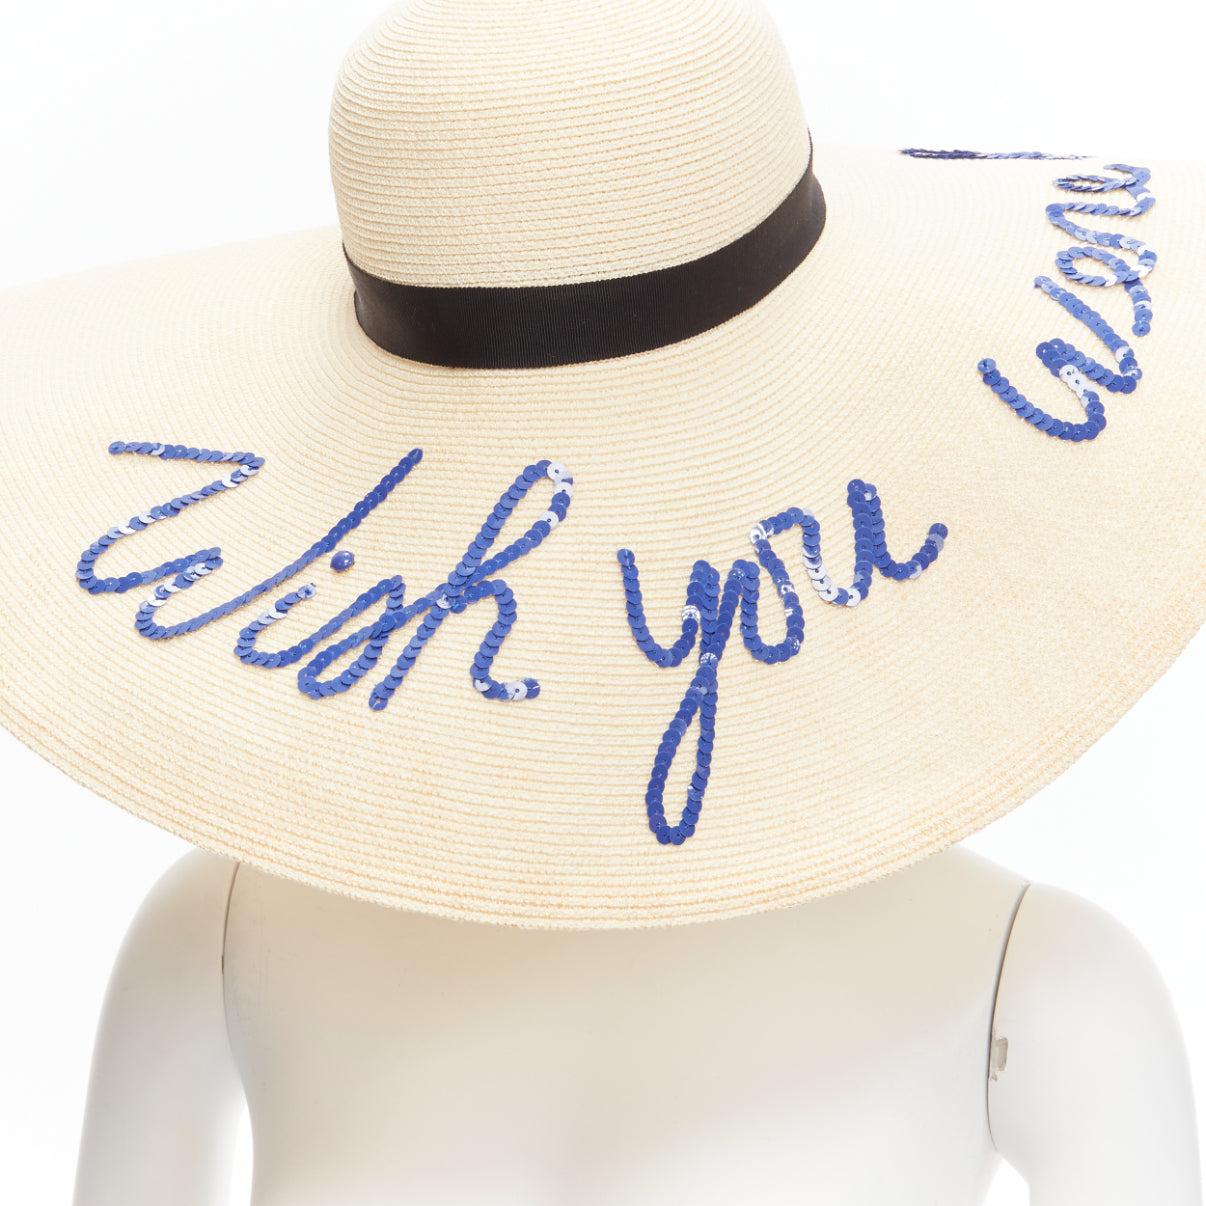 EUGENIA KIM blue sequins Wish You Were Here beige toyo paper cotton sun hat For Sale 2